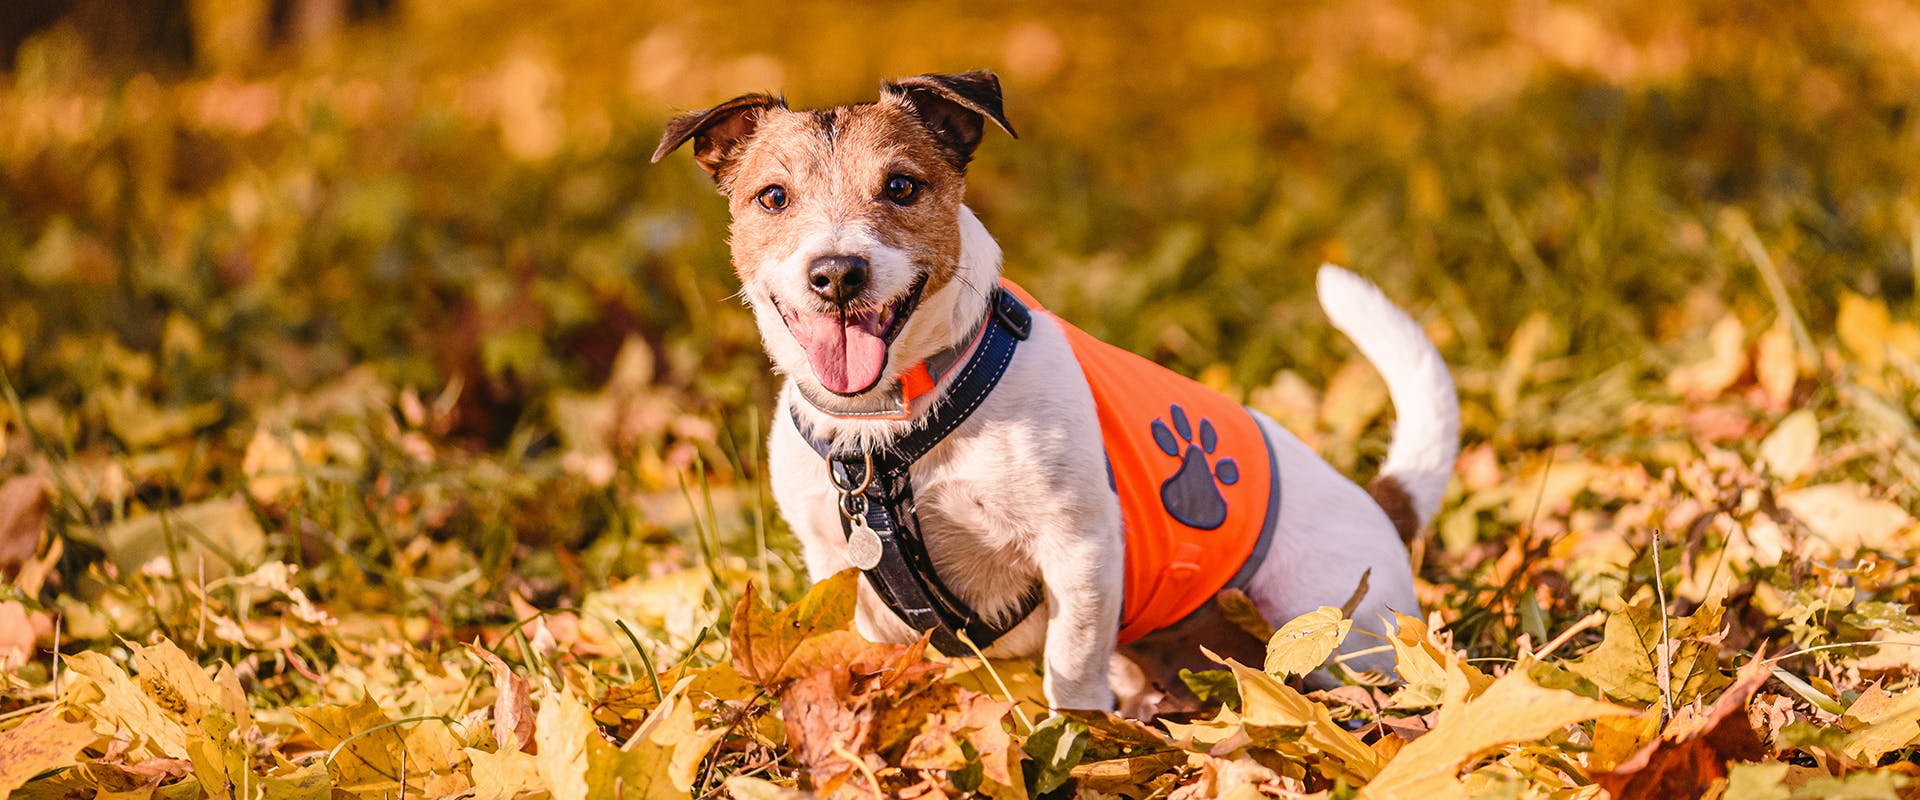 A happy dog walking through a pile of fallen leaves, wearing a bright orange small dog harness